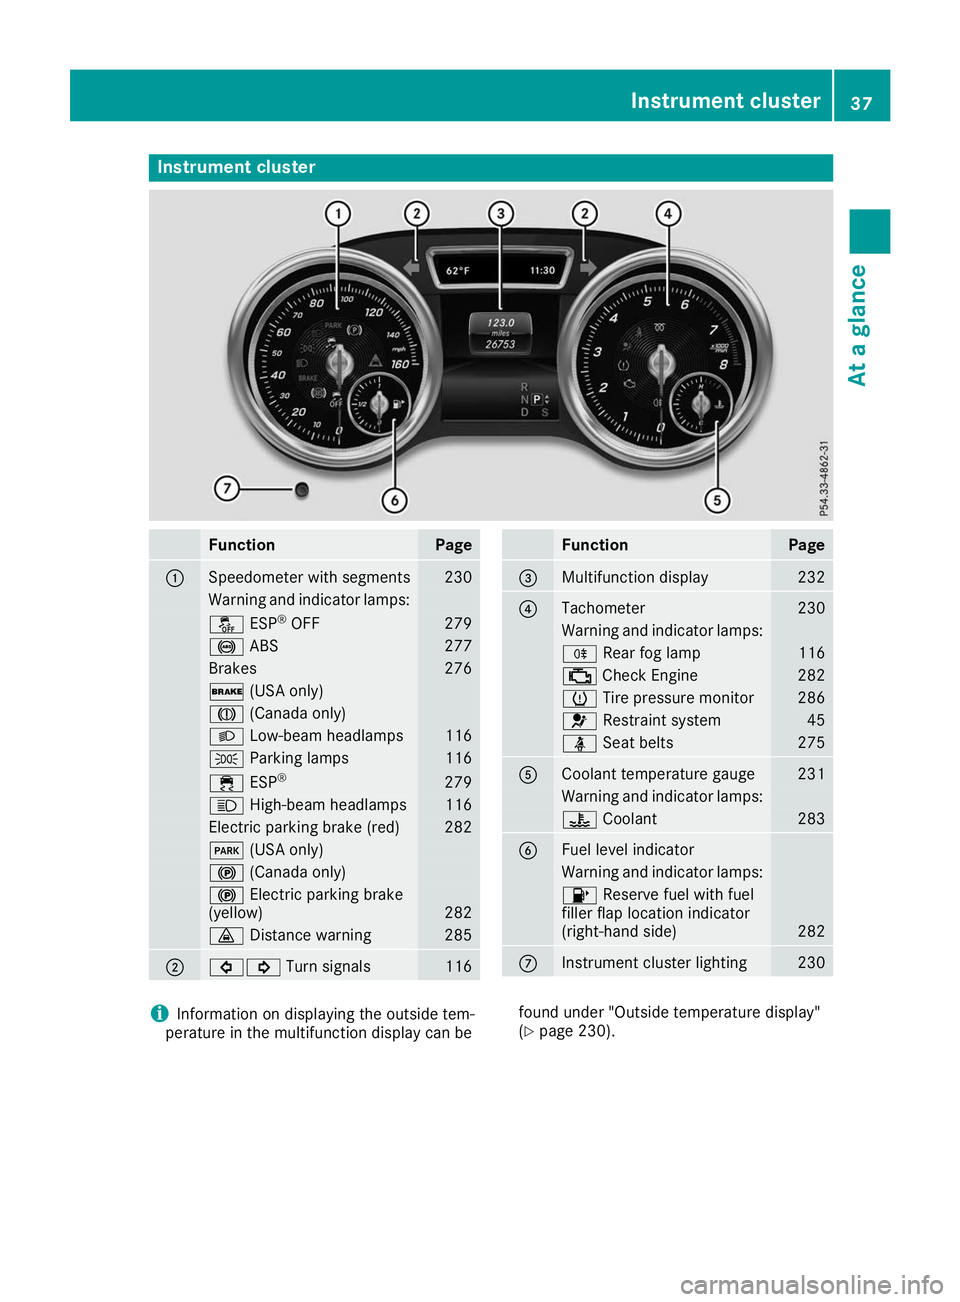 MERCEDES-BENZ GLS 2019  Owners Manual Instrument cluster
Function Page
0043
Speedometer with segments 230
Warning and indicator lamps:
00BB
ESP®
OFF 279
0025
ABS 277
Brakes 276
0027
(USA only) 004D
(Canada only) 0058
Low-beam headlamps 1